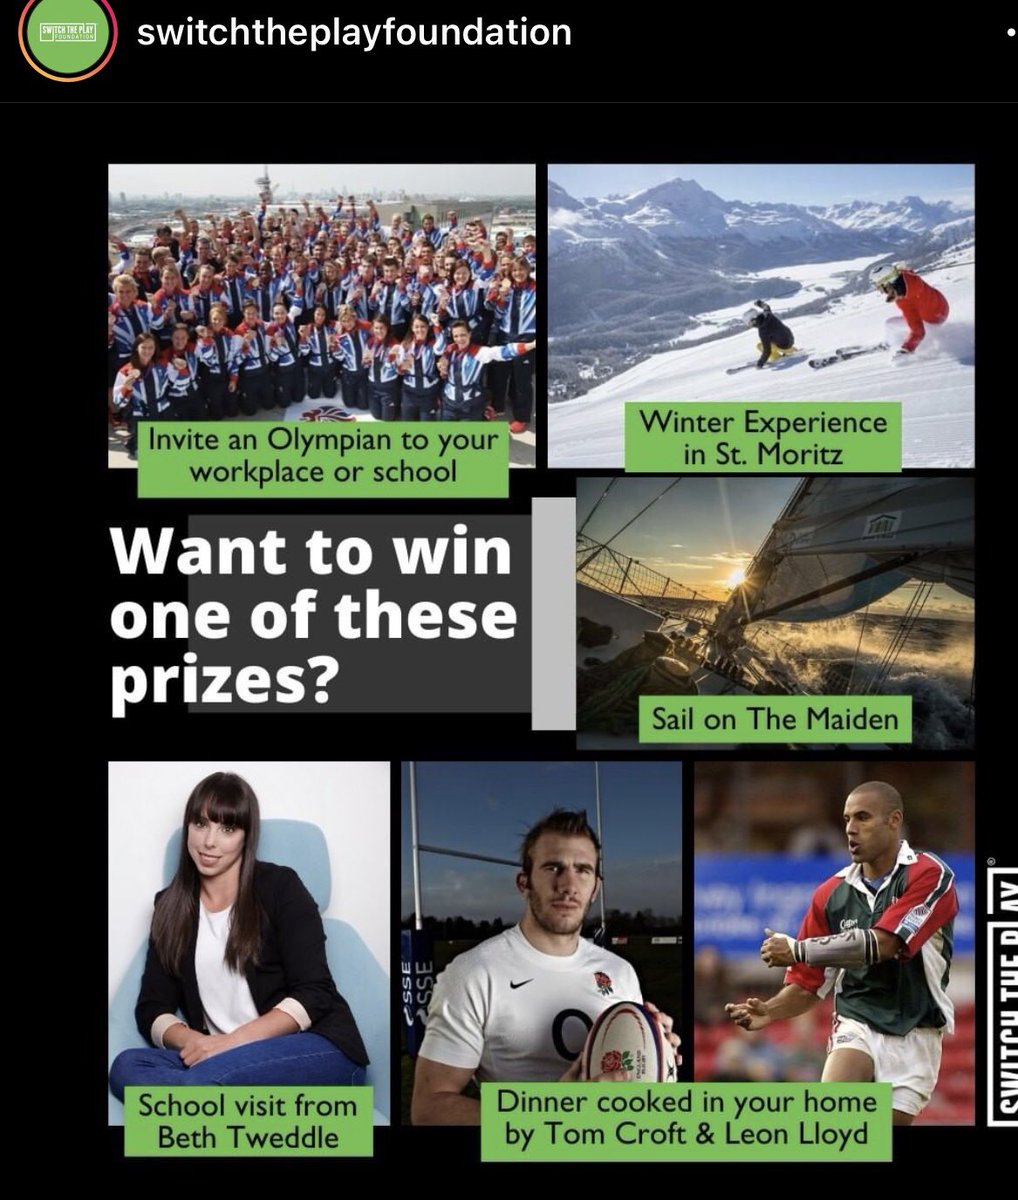 March 14th is last day to enter prize draw @ChancePrize and select @Switch_the_Play UK’s only charity helping us to empower Athletes in taking control of their future How to enter: 1. Click the link. 2. Make your donation. sportingchanceprizedraw.com/enter-draw-don… great prizes to be won